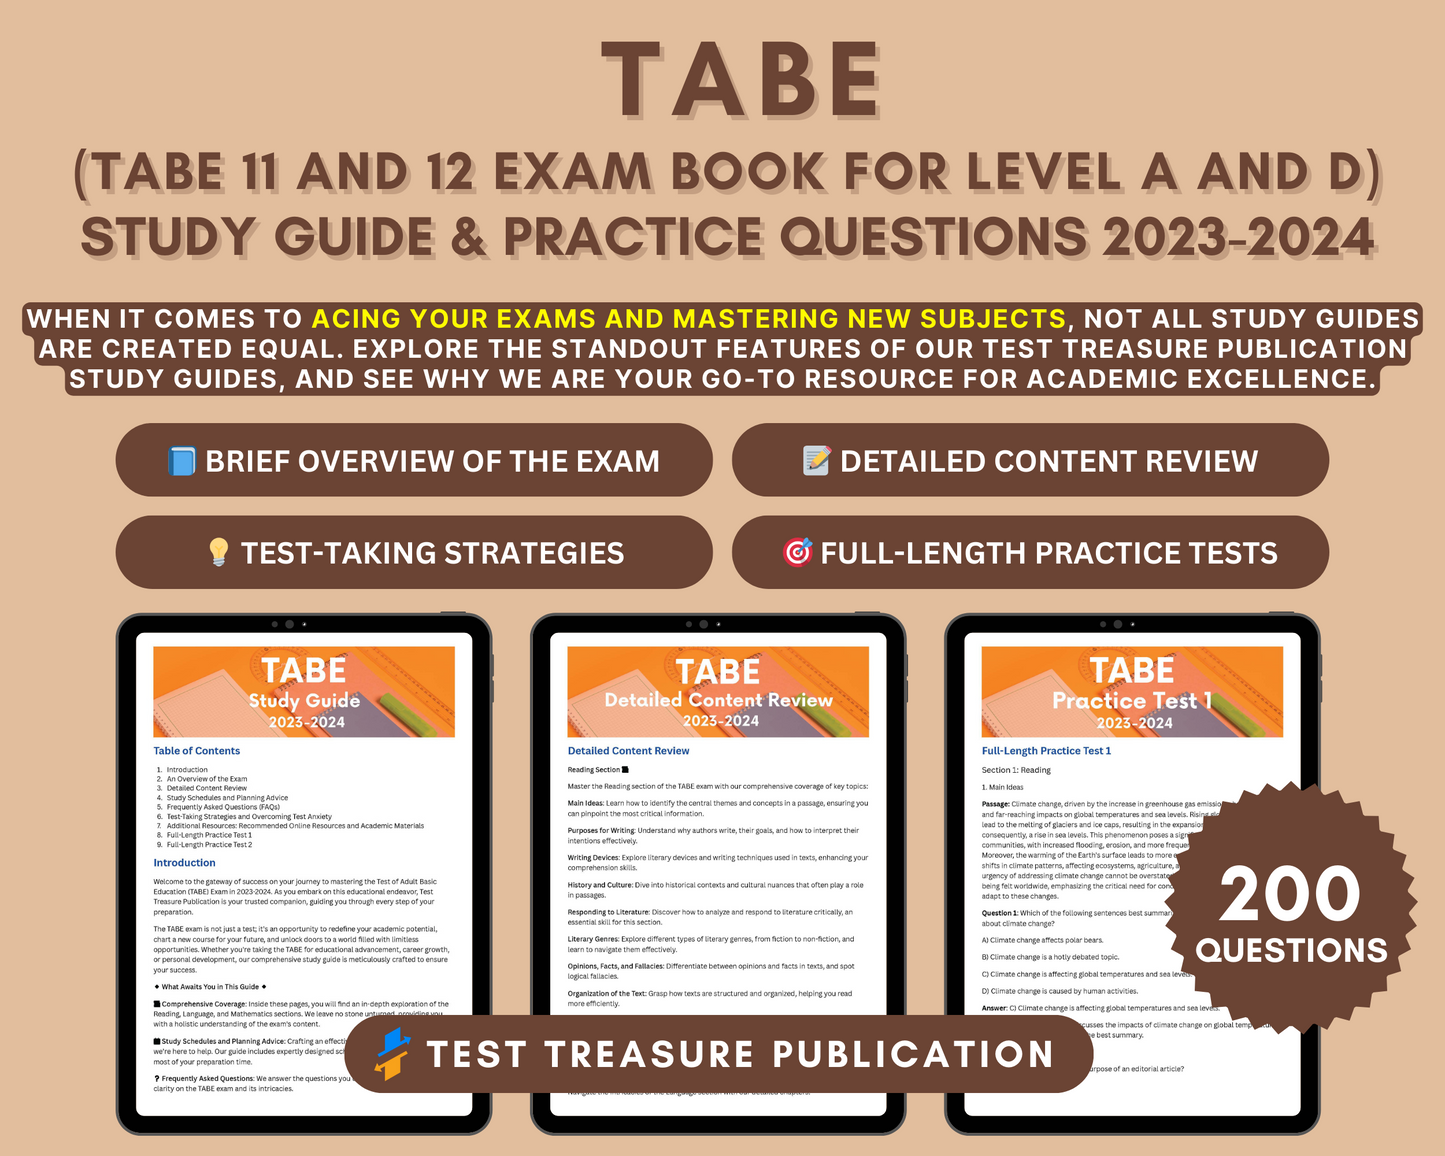 TABE Test Study Guide 2023-2024: Unlock Success with In-Depth Content Review, Practice Tests & Exam Strategies